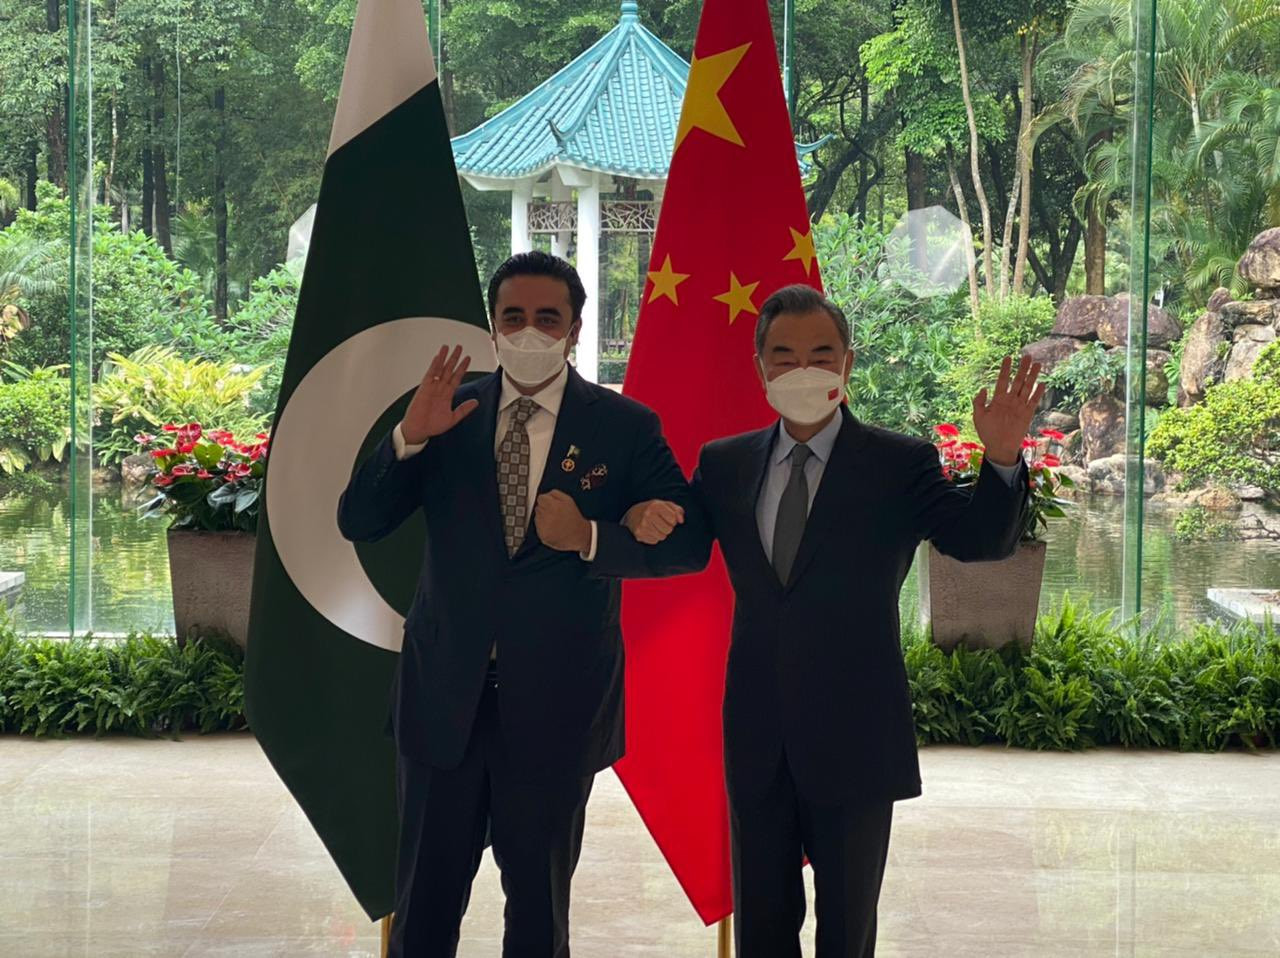 sino-pak friendship based on solidarity, trust, mutual support'